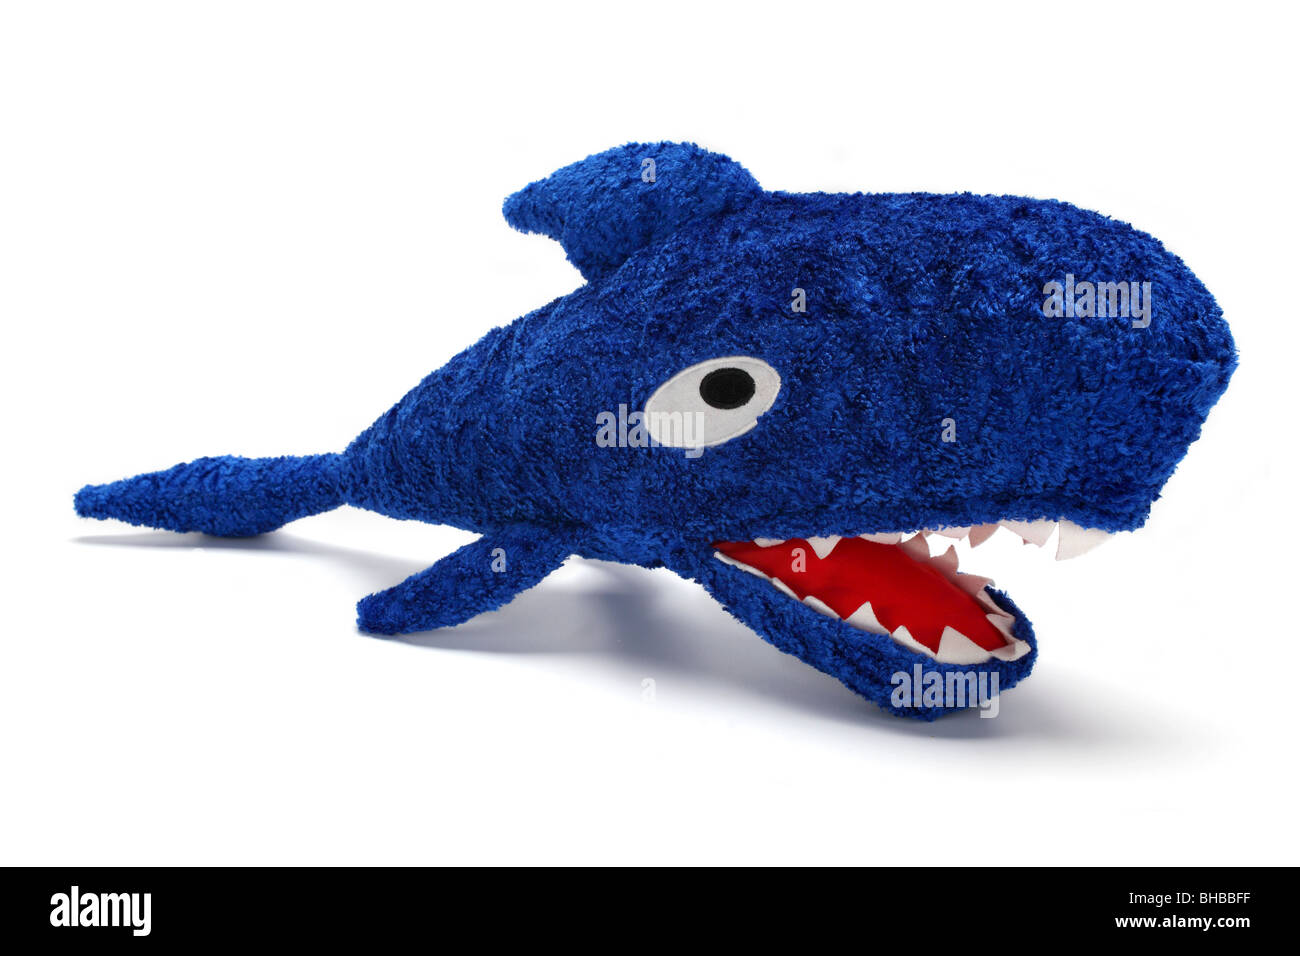 Stuffed Shark High Resolution Stock Photography and Images - Alamy